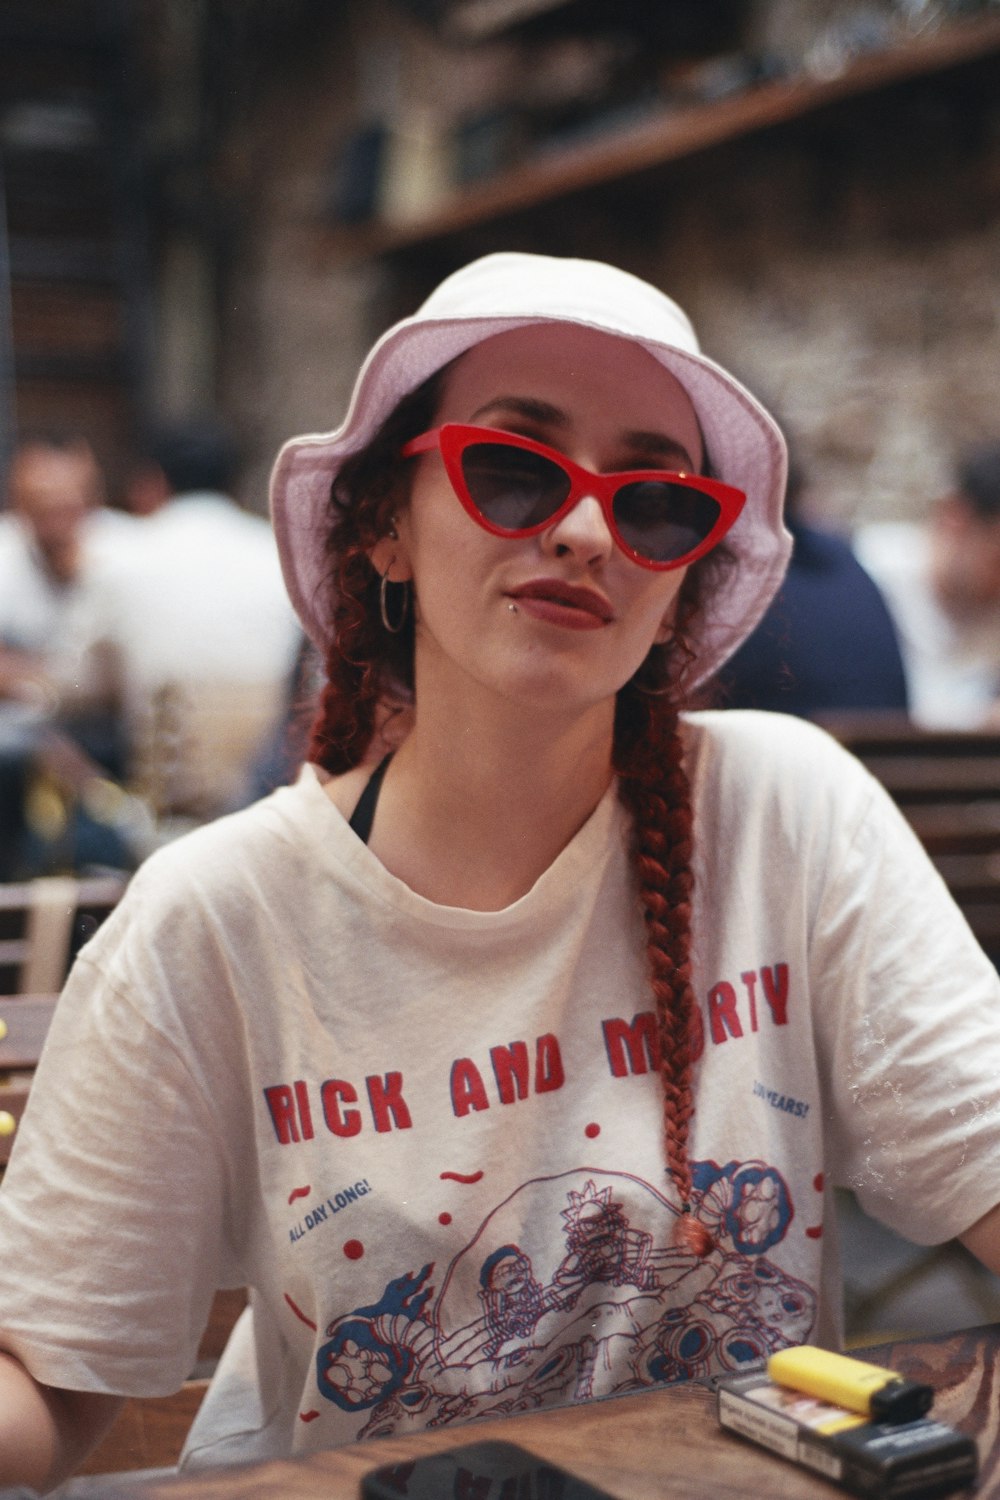 a woman sitting at a table wearing a pink hat and sunglasses